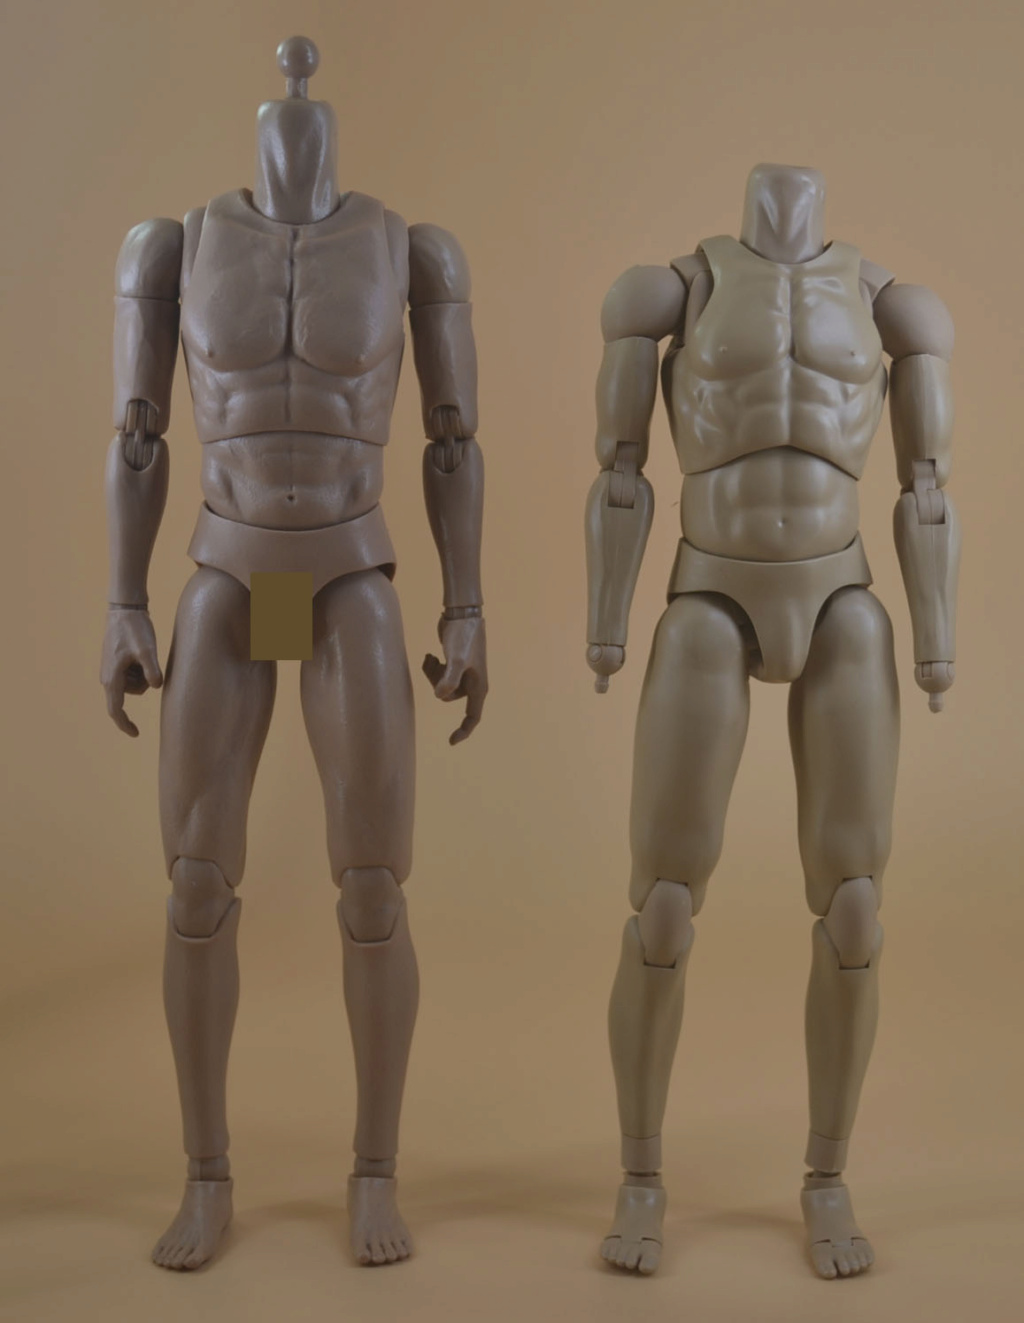 NEW PRODUCT: COOMODEL: 1/6 MB001 standard male body, MB002 tall male body, MB003 muscle male body, MB004 tall muscle body _dsc3737